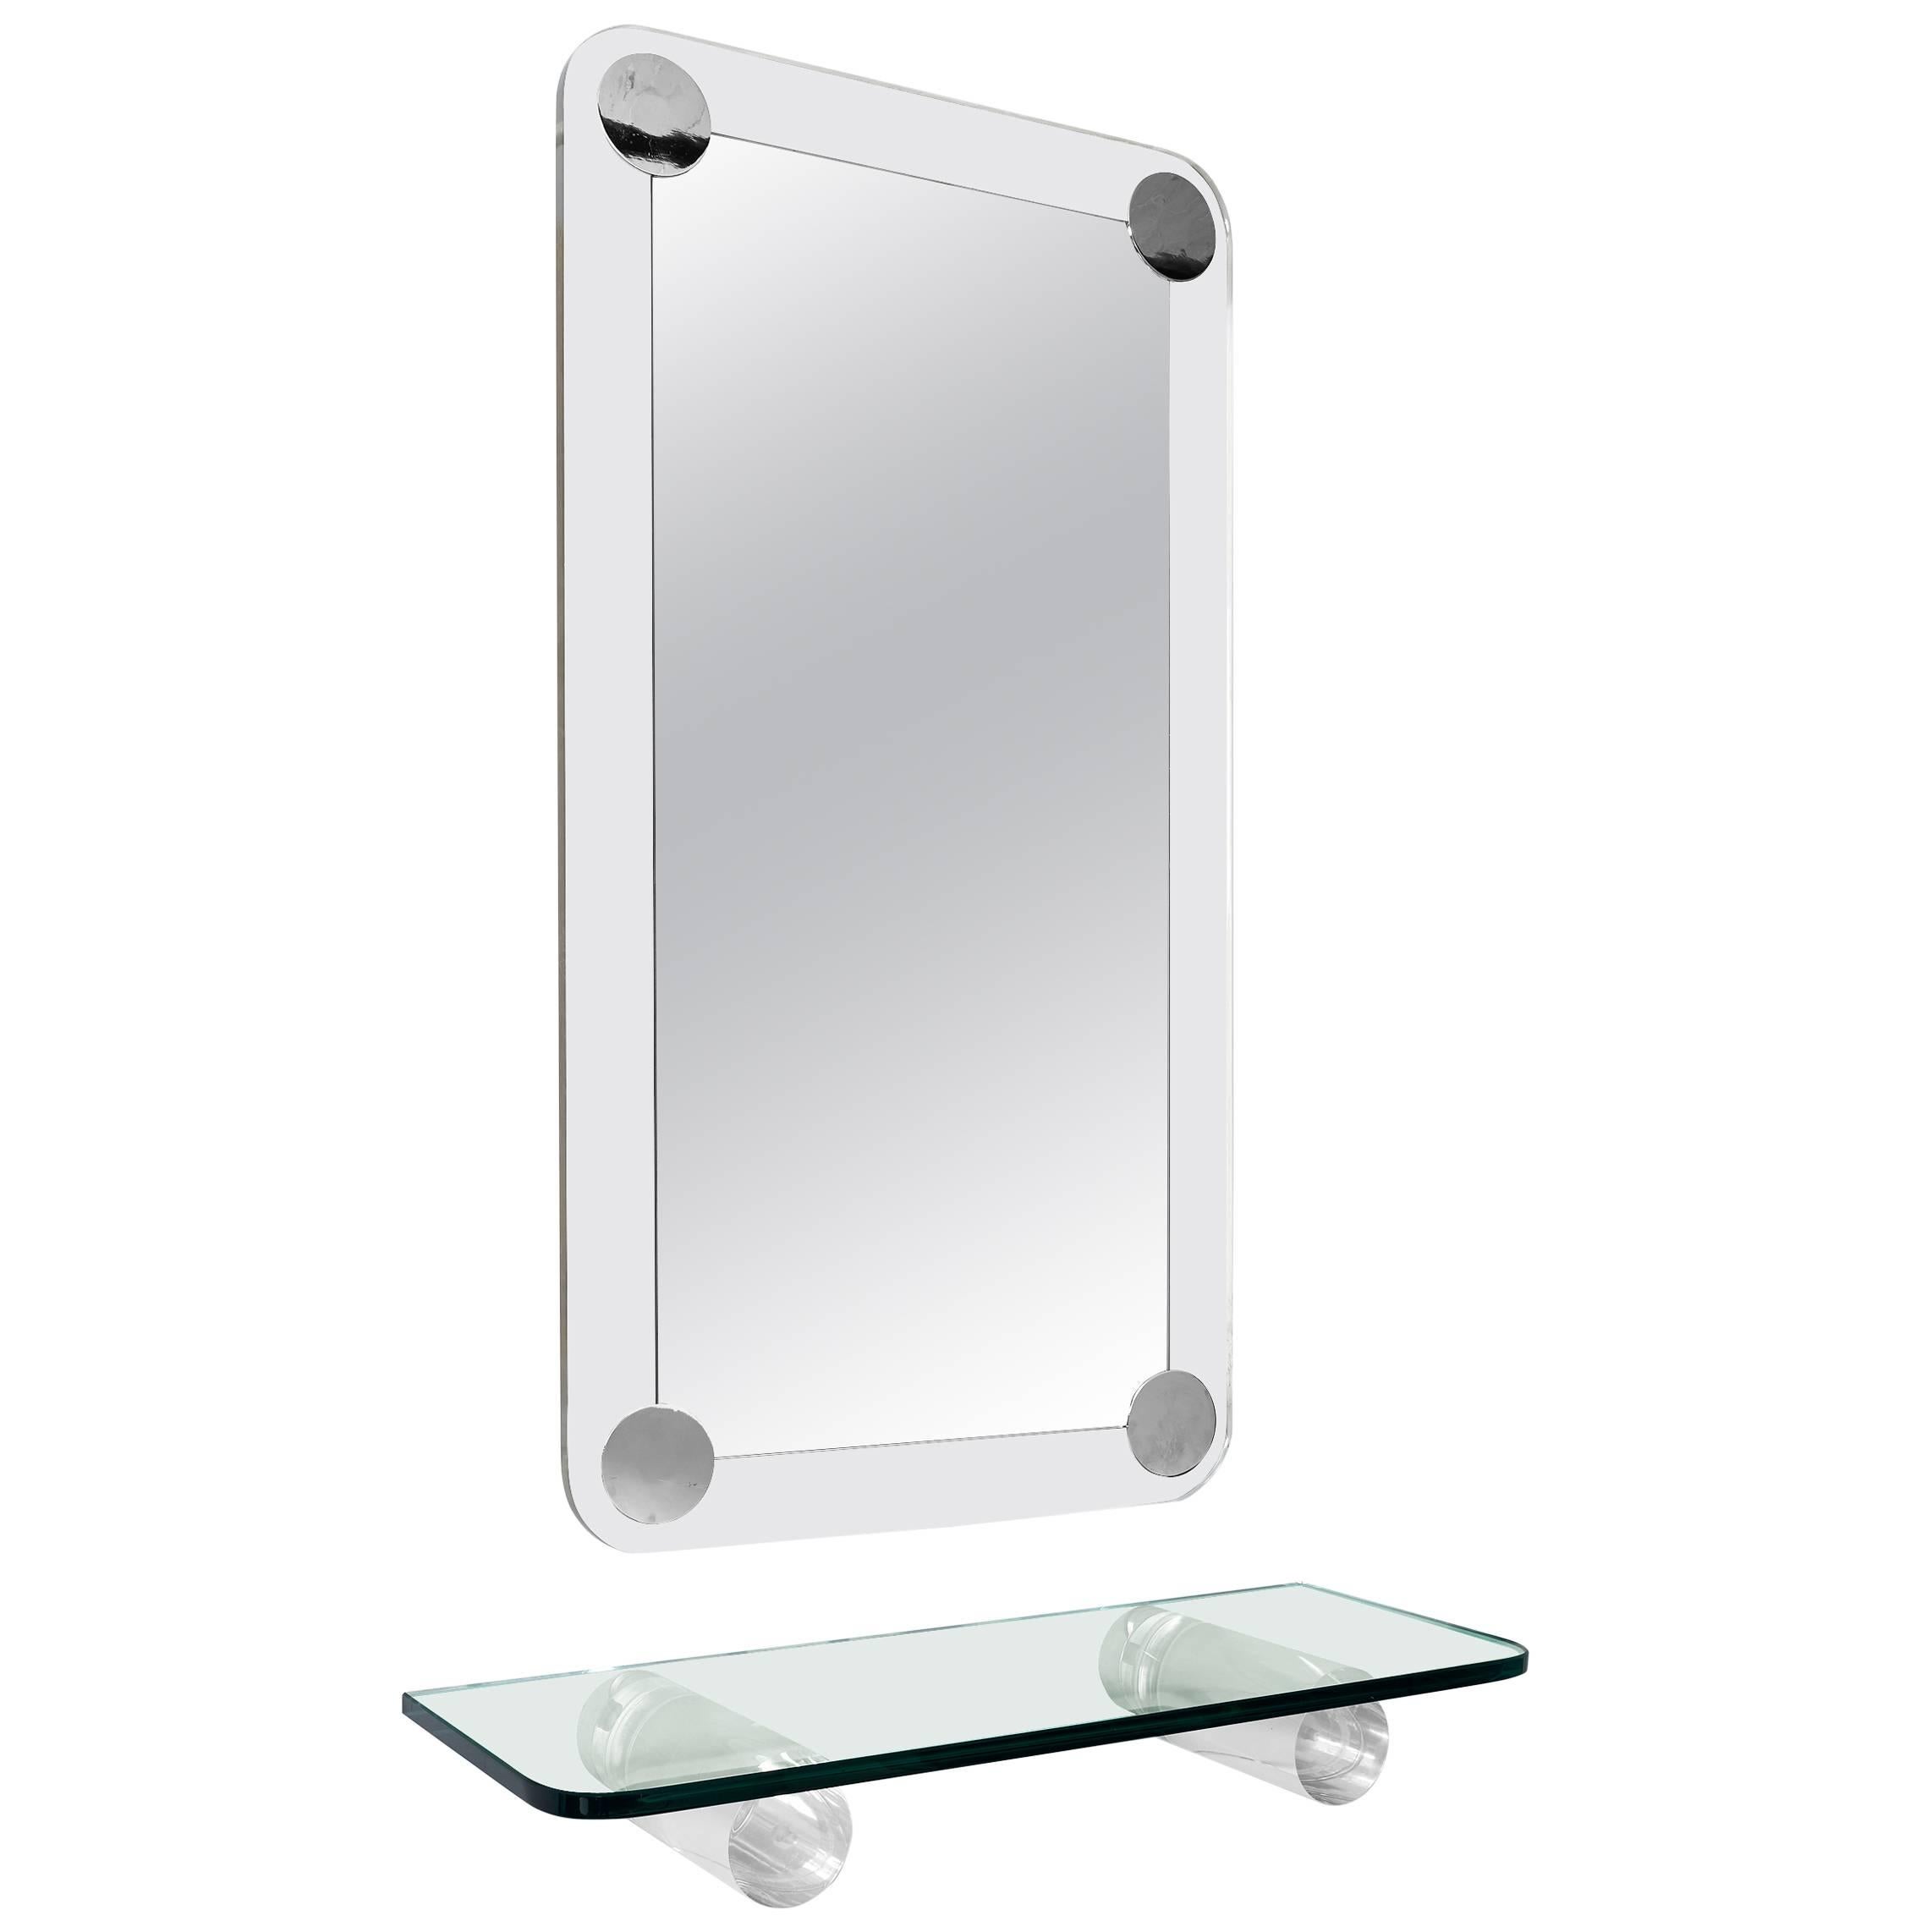 Pace Collection Mirror and Lucite Shelf, circa 1970s